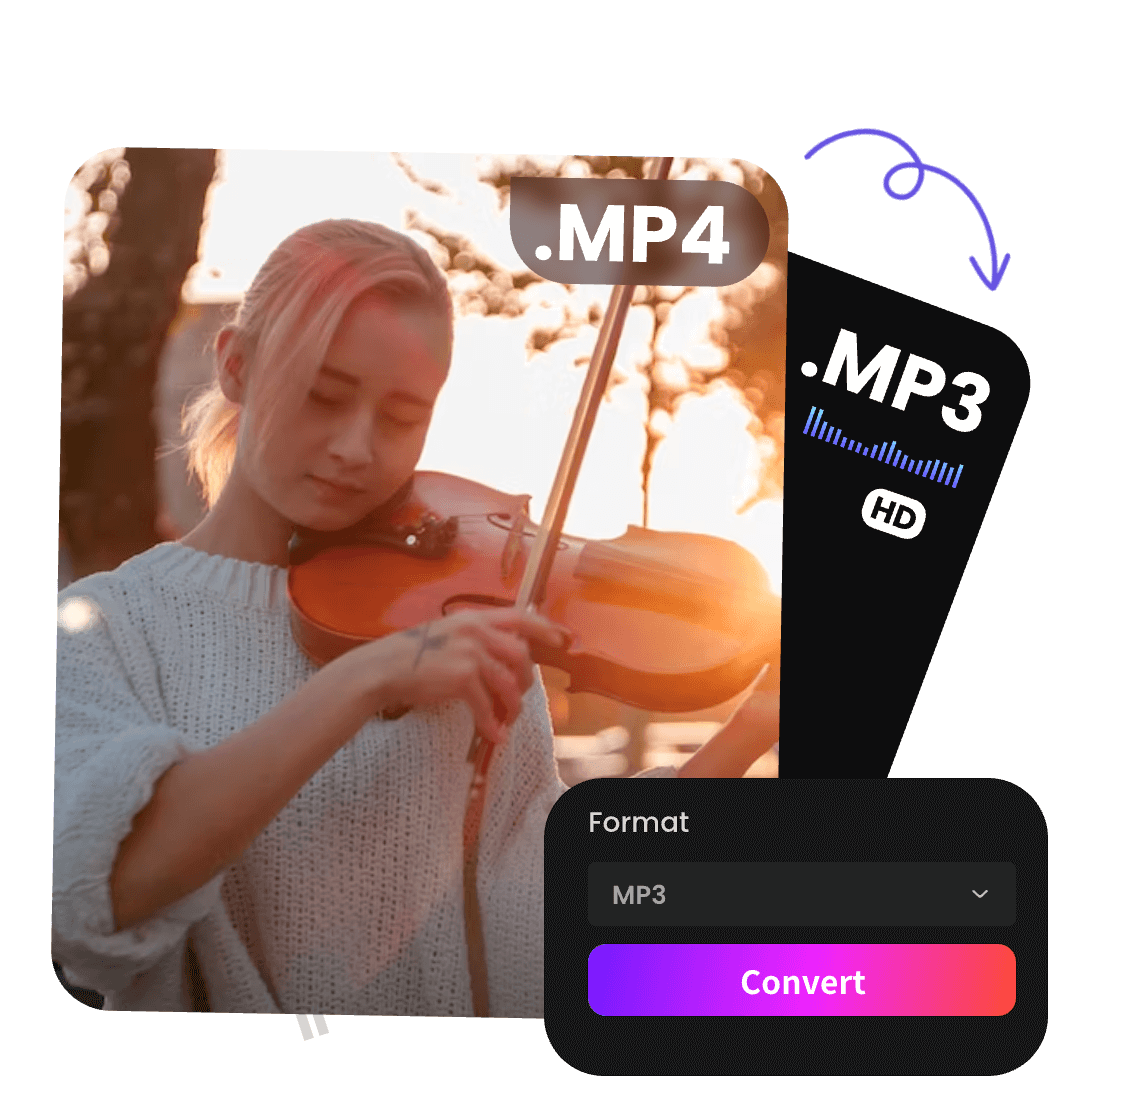 easily convert a video of a girl playing the violin from MP4 to MP3 with Clipfly's MP4 to MP3 converter